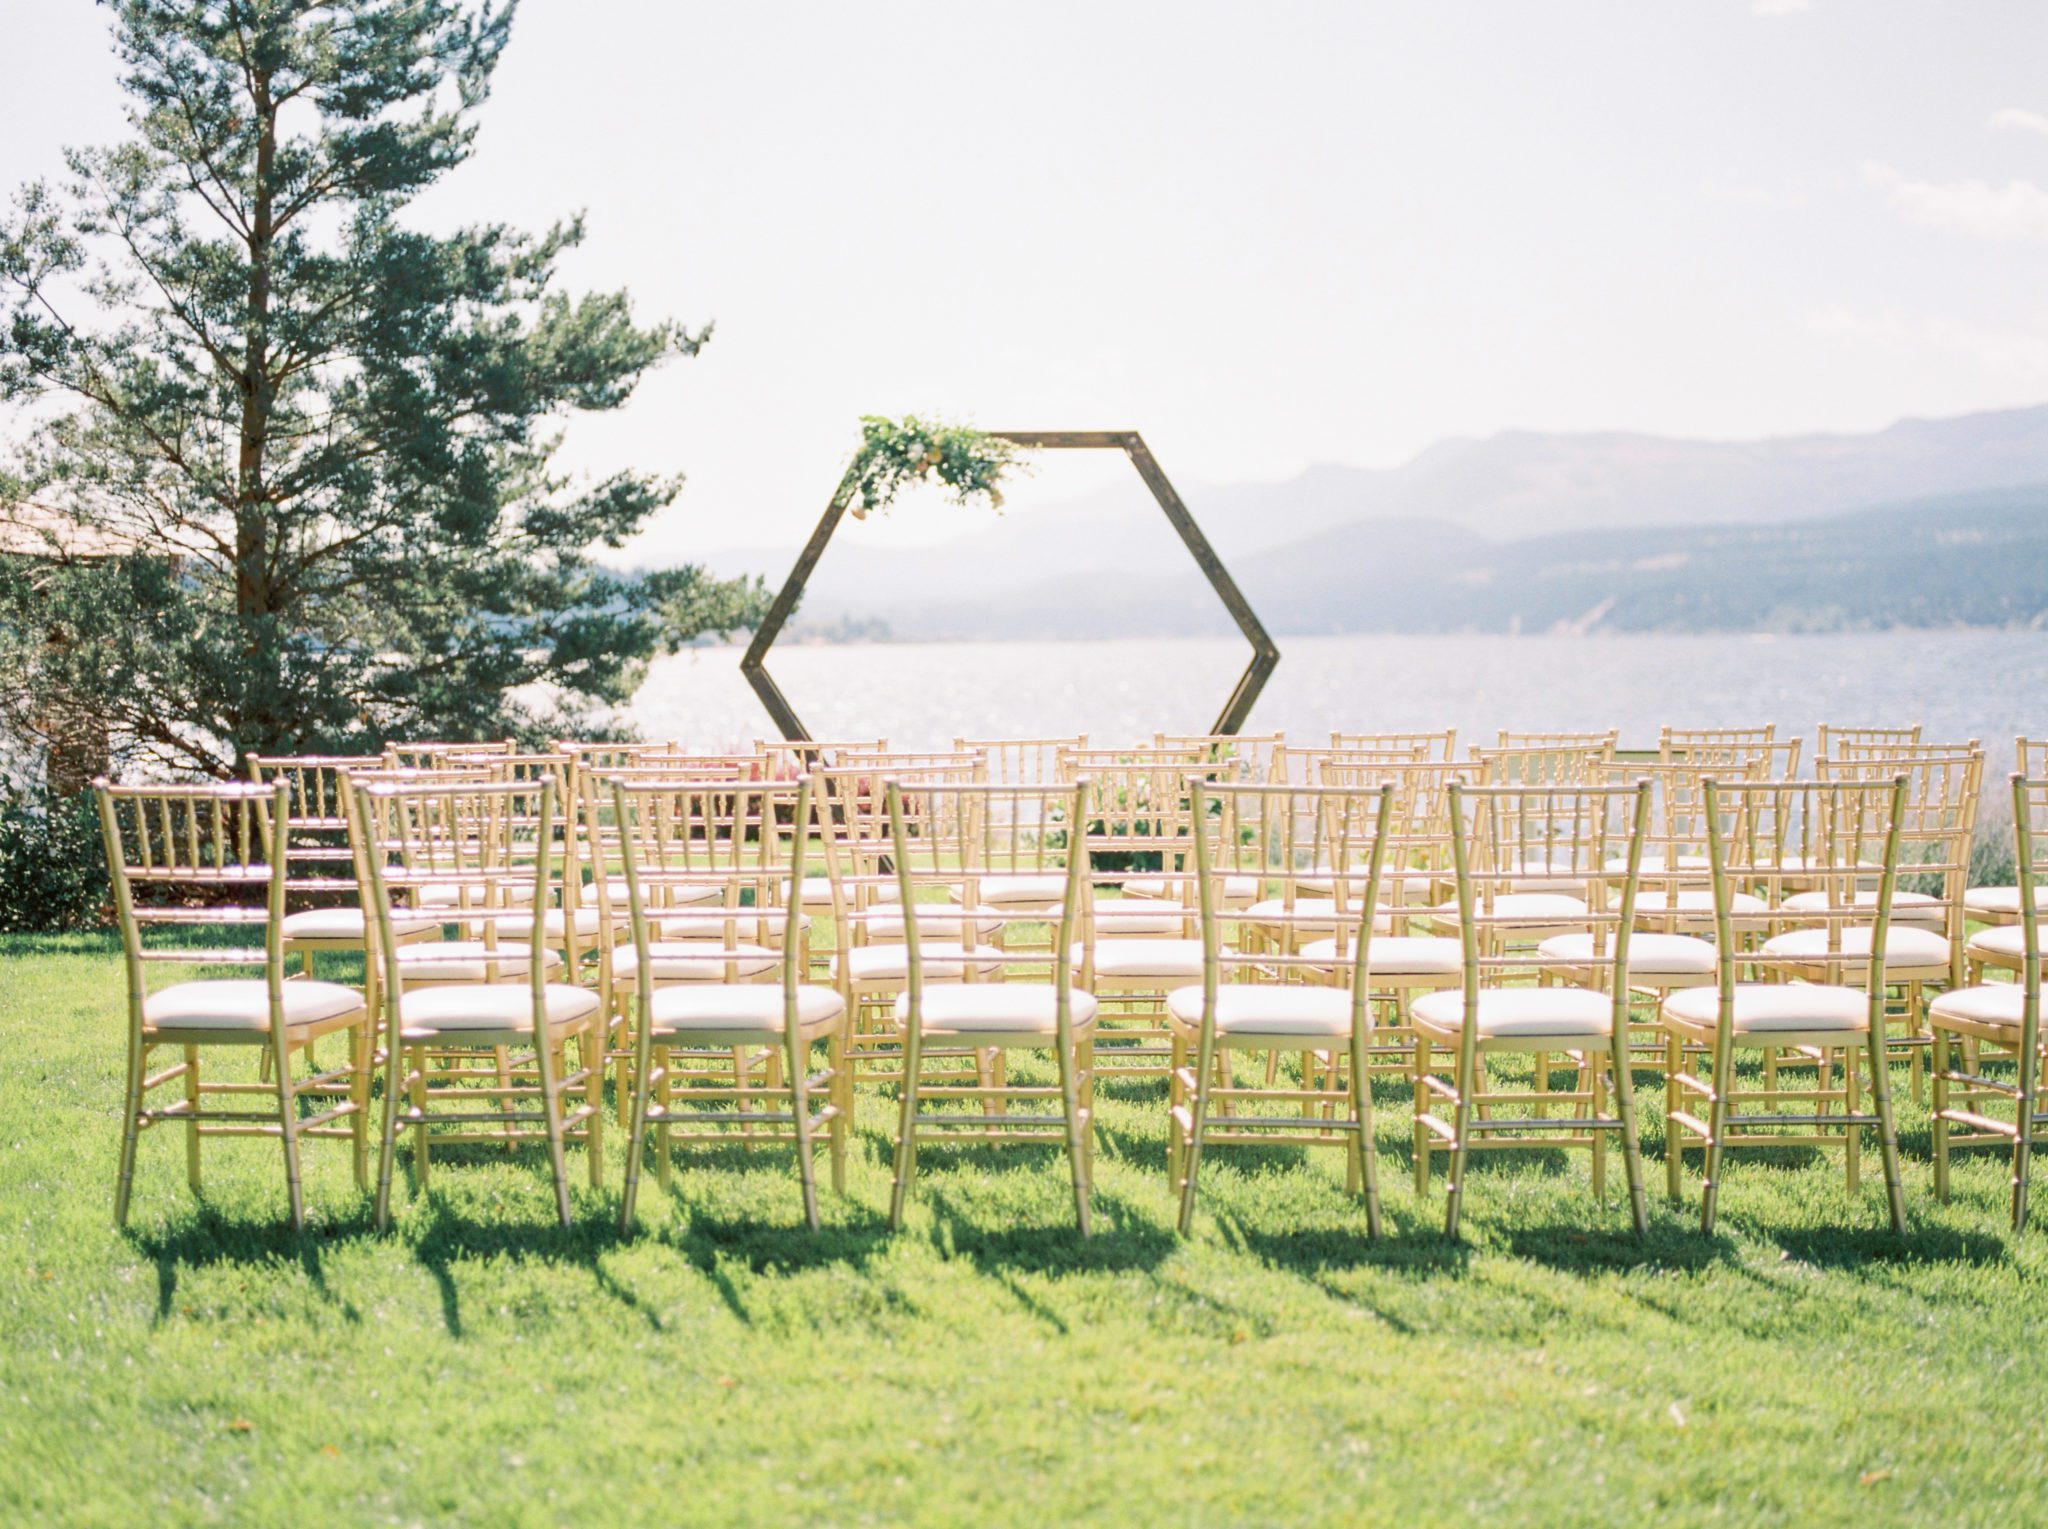 Wedding ceremony decor inspiration for a lakeside mountain Invermere wedding ceremony